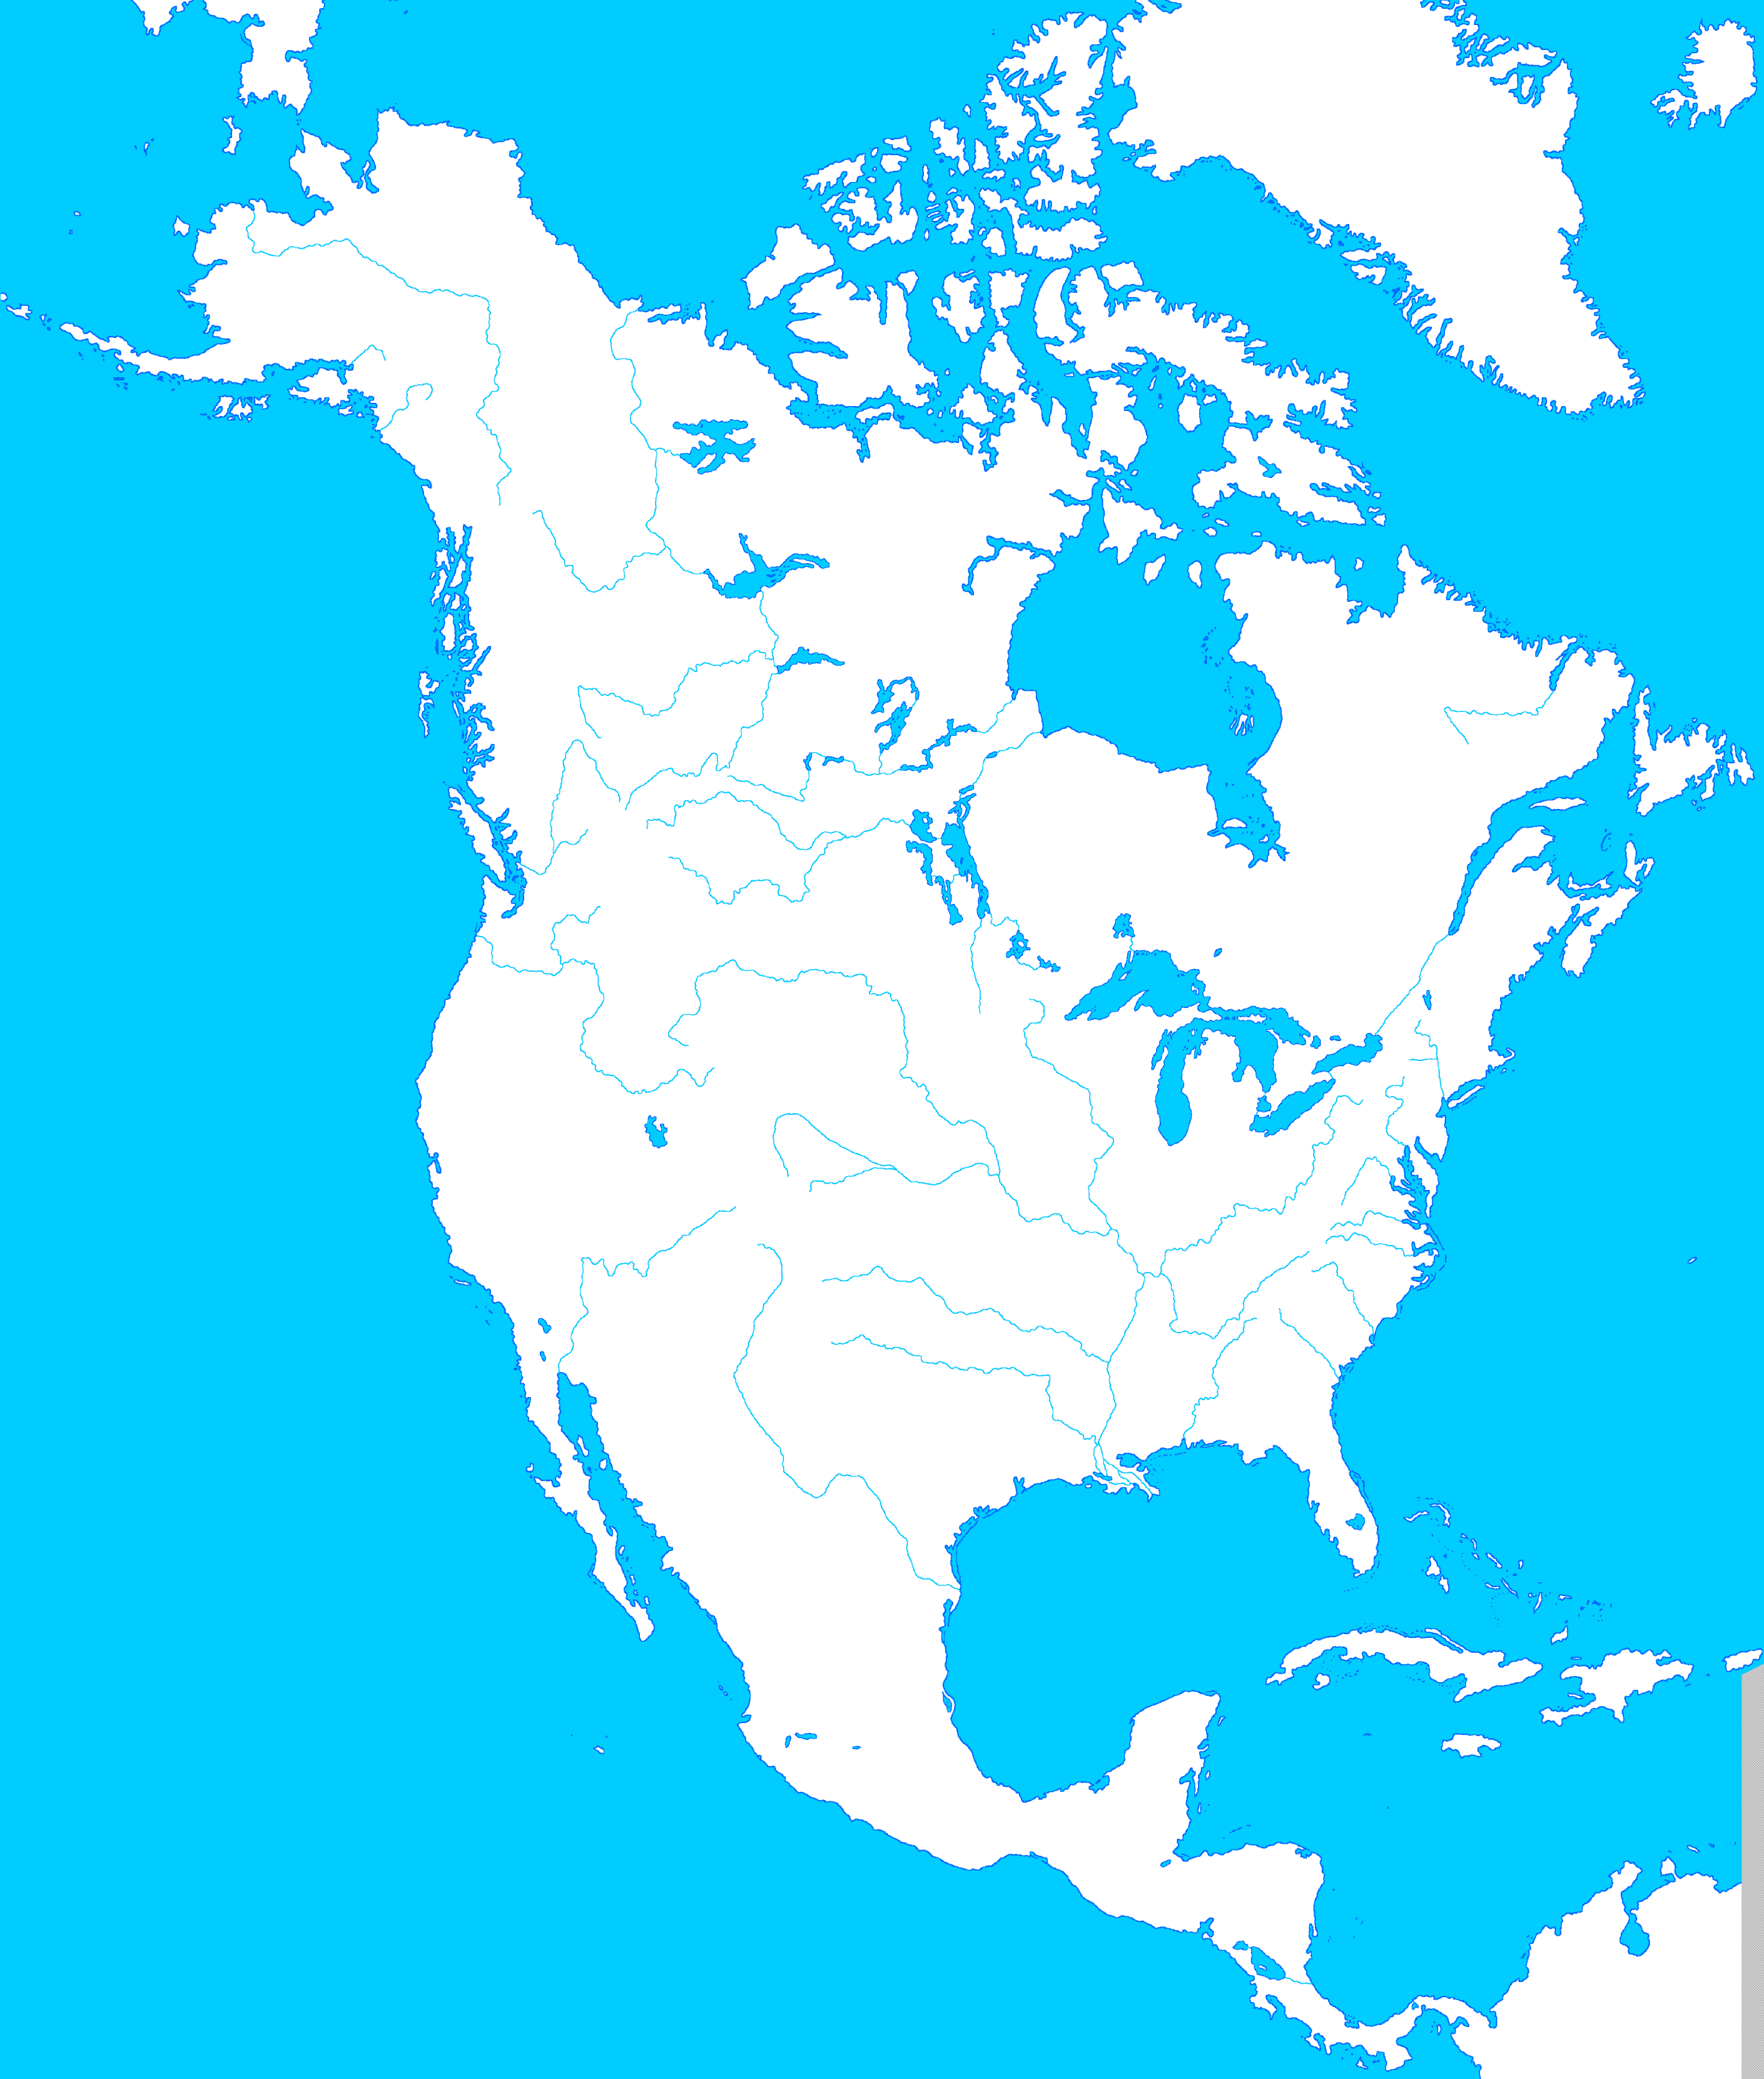 North America Blank Map Template II by mdc01957 on DeviantArt